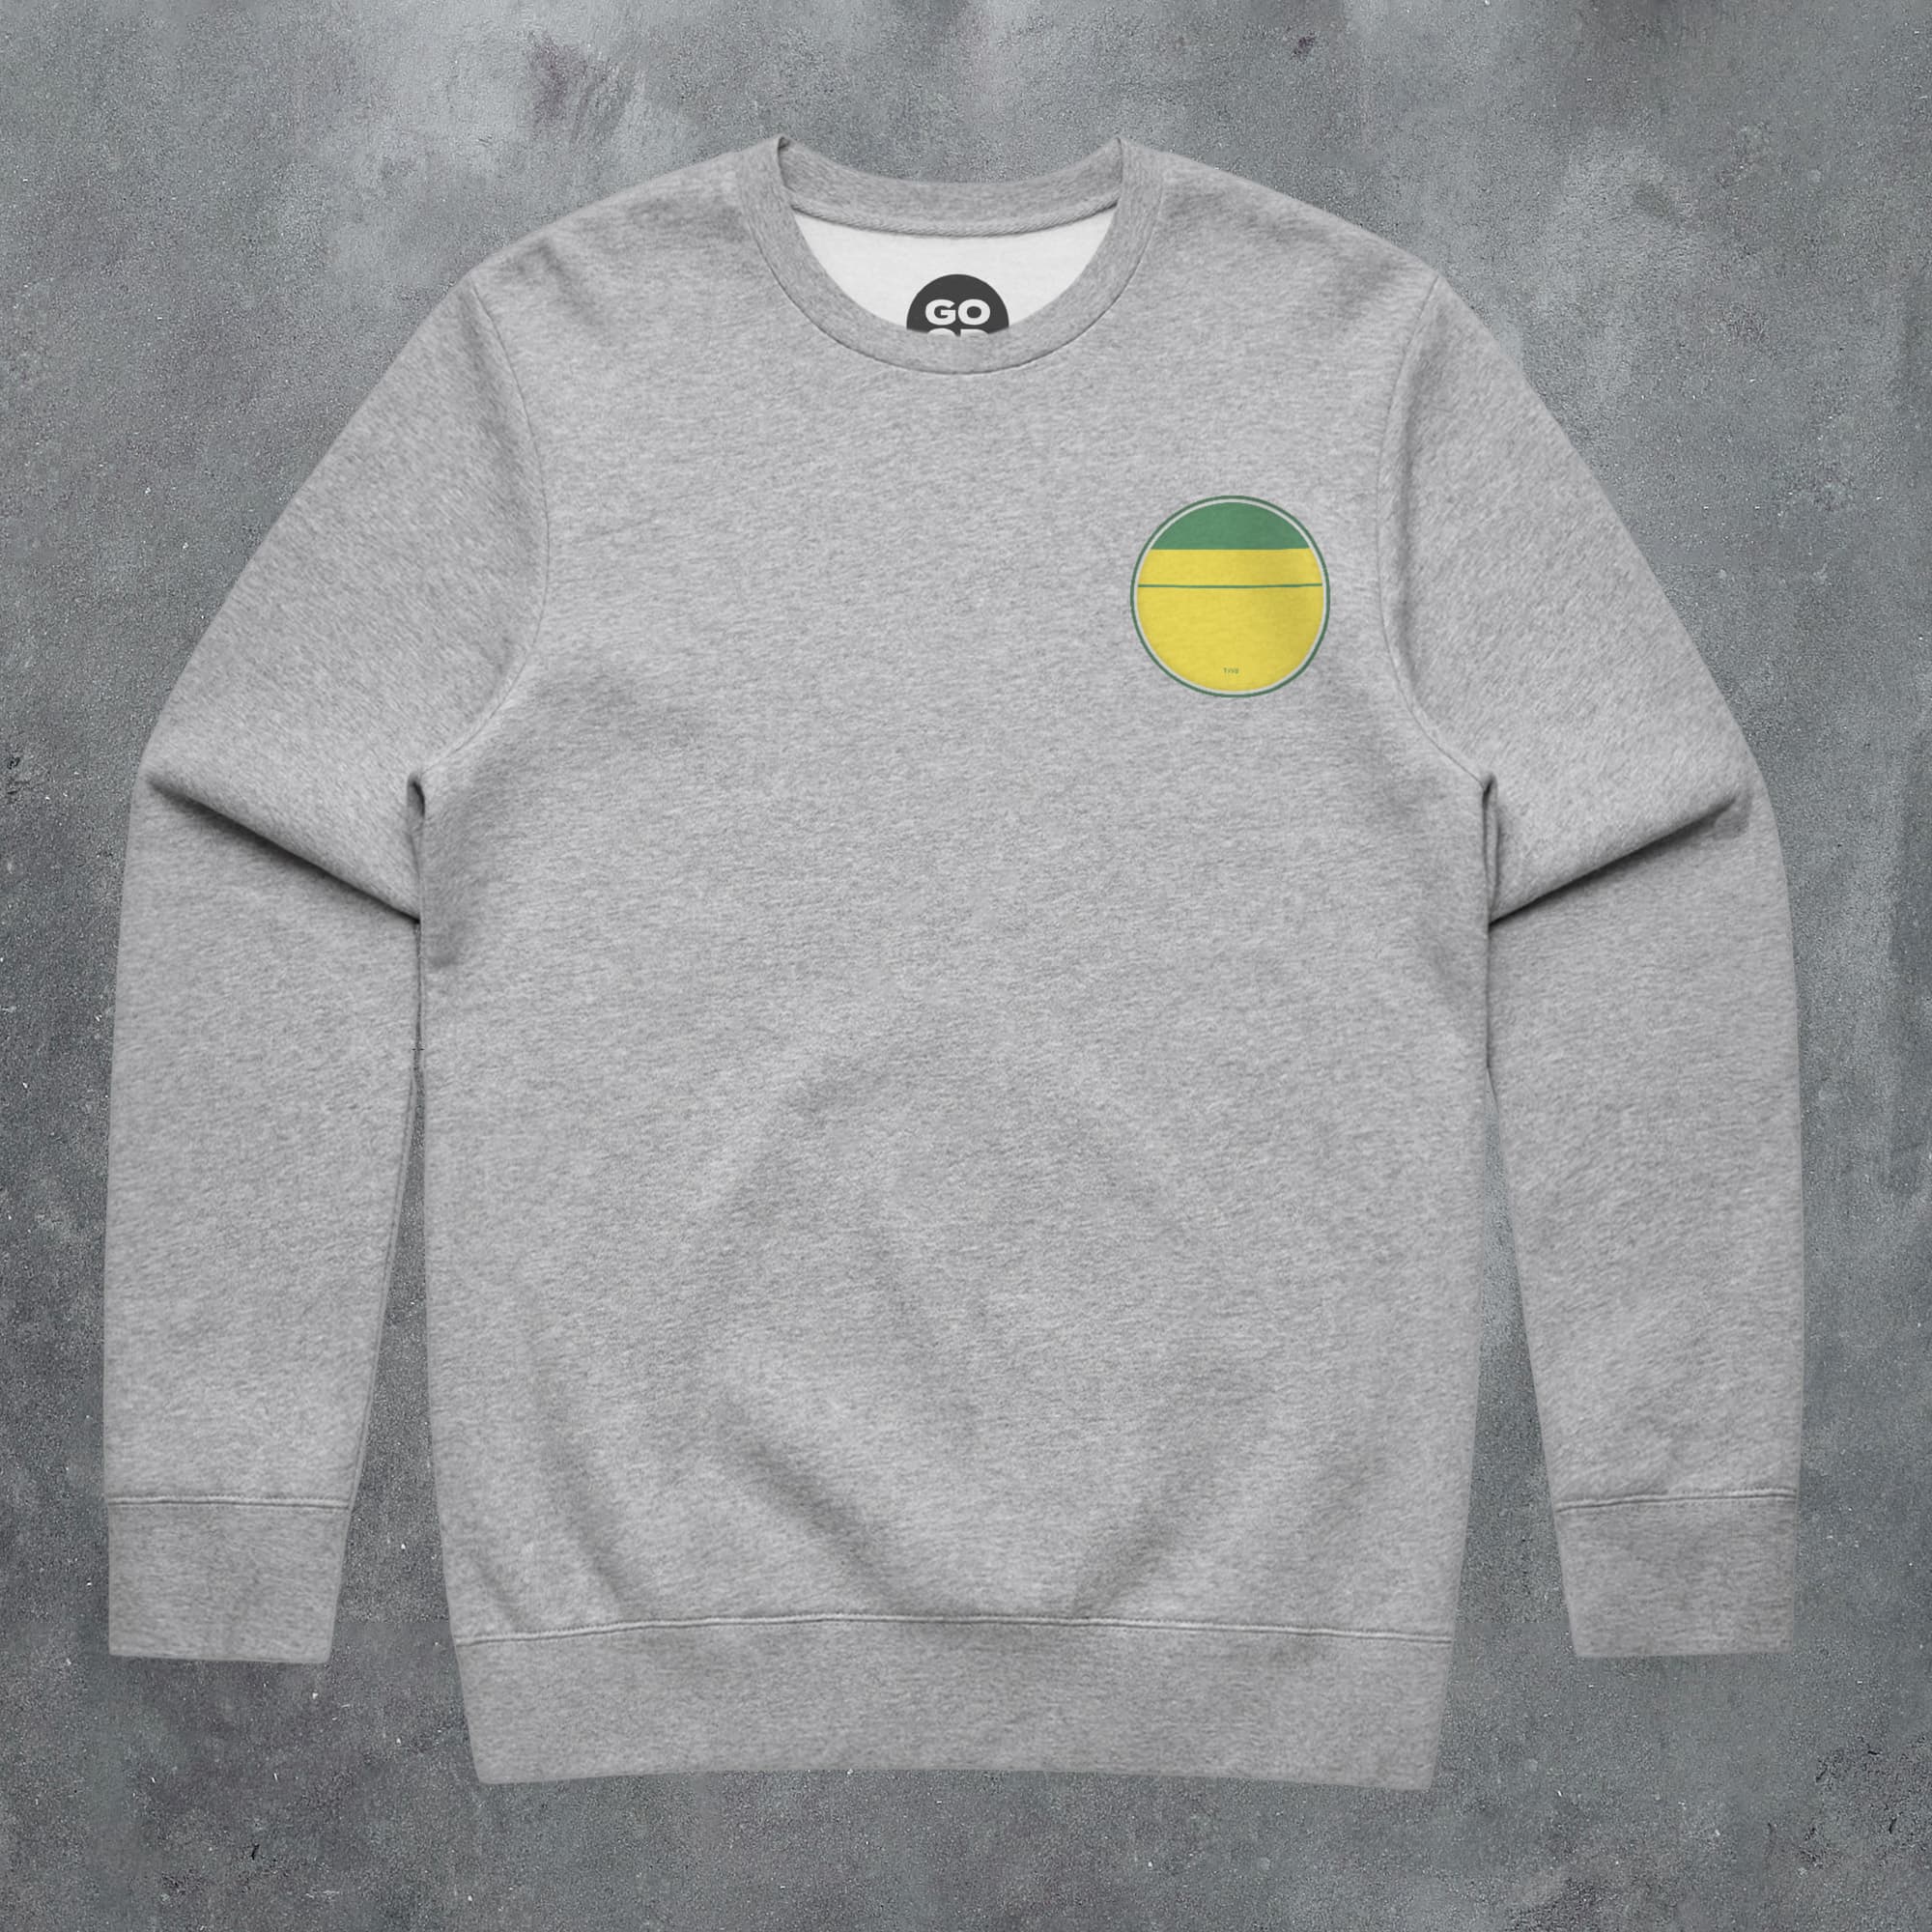 a grey sweatshirt with a yellow and green circle on it